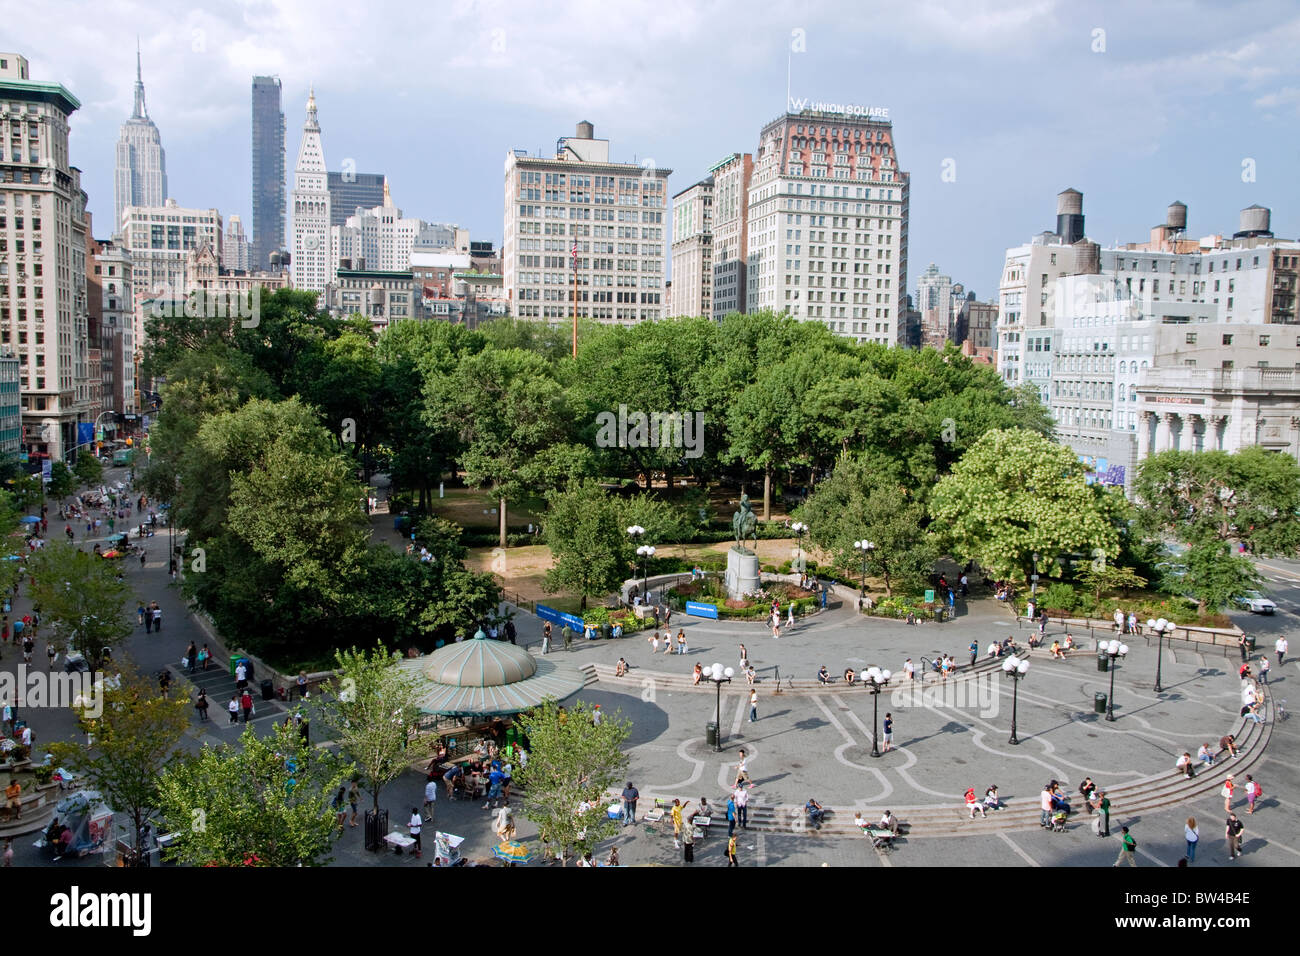 Union Square, Manhattan, New York City, South end looking North. Stock Photo